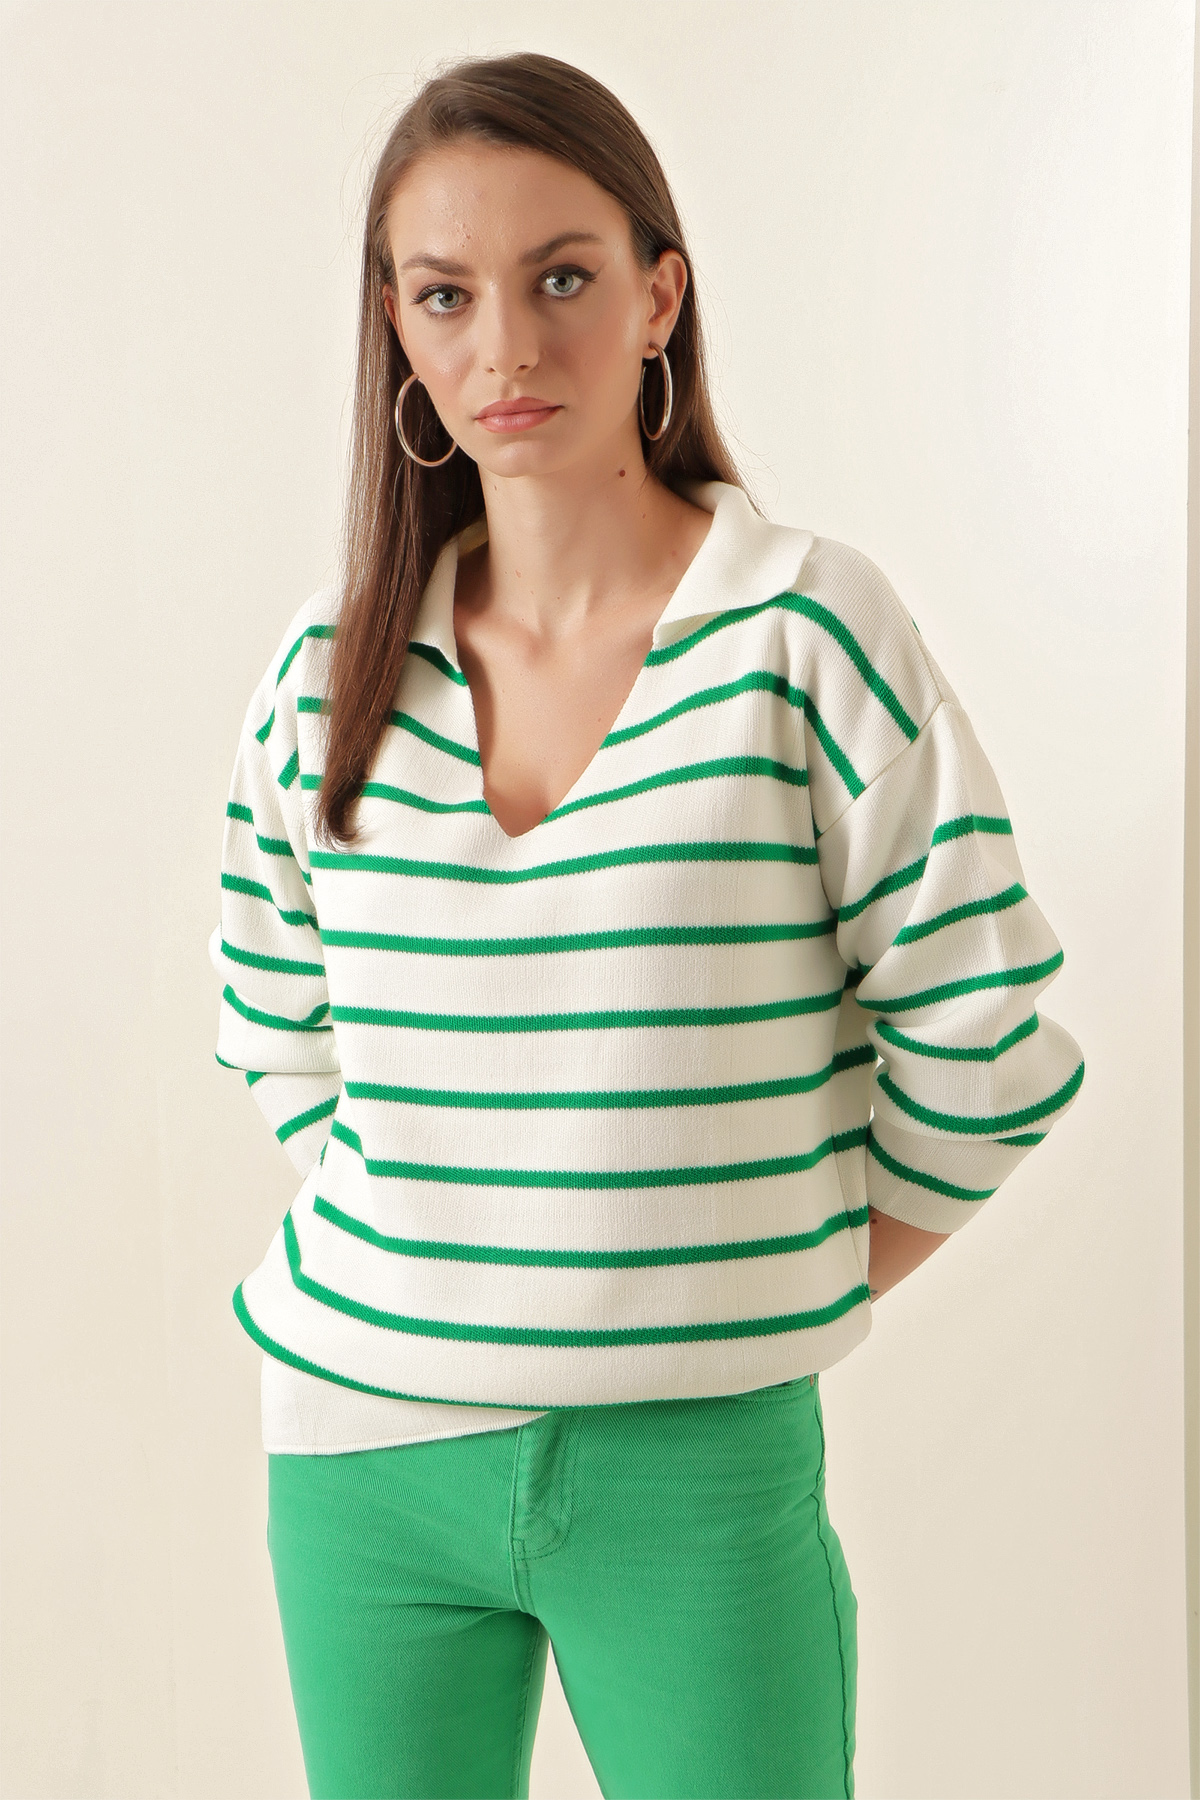 A model wears 46062 - Striped Sweater - Green, wholesale Sweater of Bigdart to display at Lonca